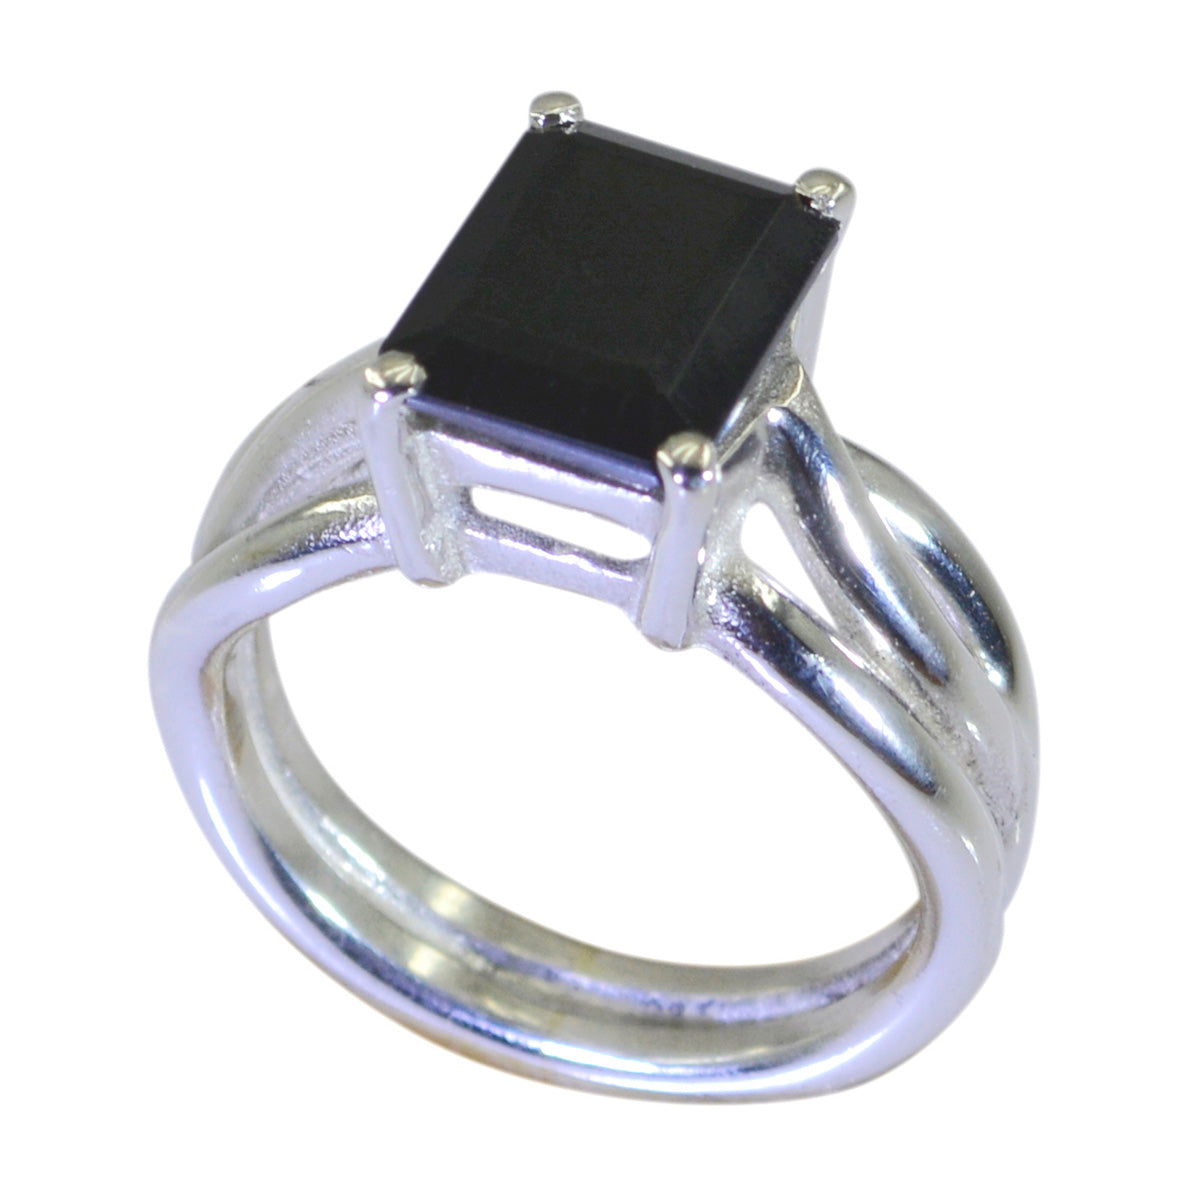 Magnetic Gem Black Onyx 925 Sterling Silver Ring Italian Gold Jewelry